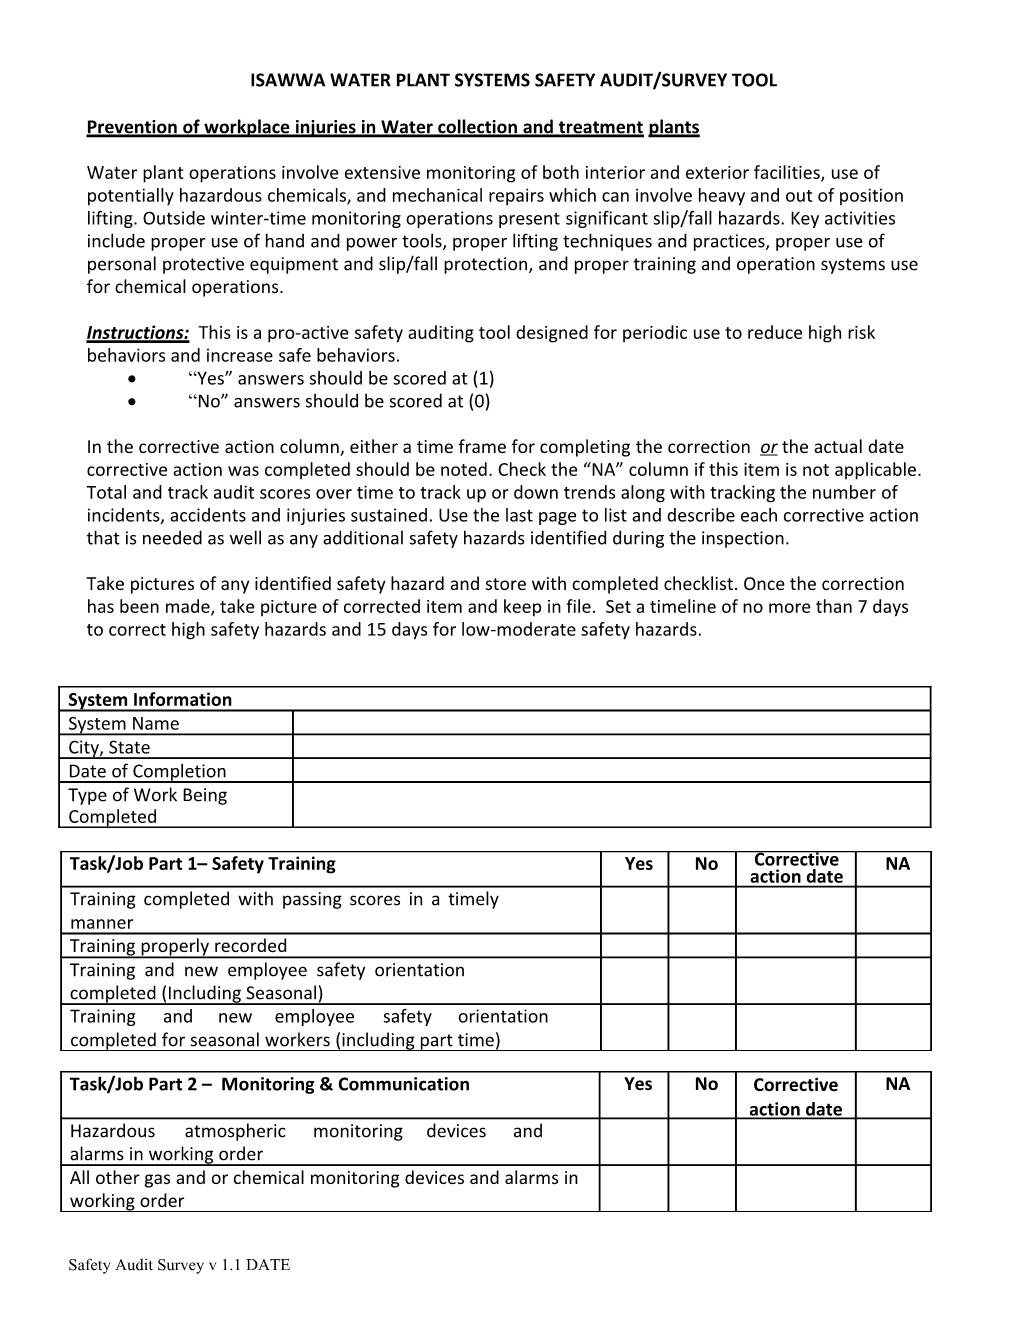 Microsoft Word - Water Plant Systems Safety Audit.Doc